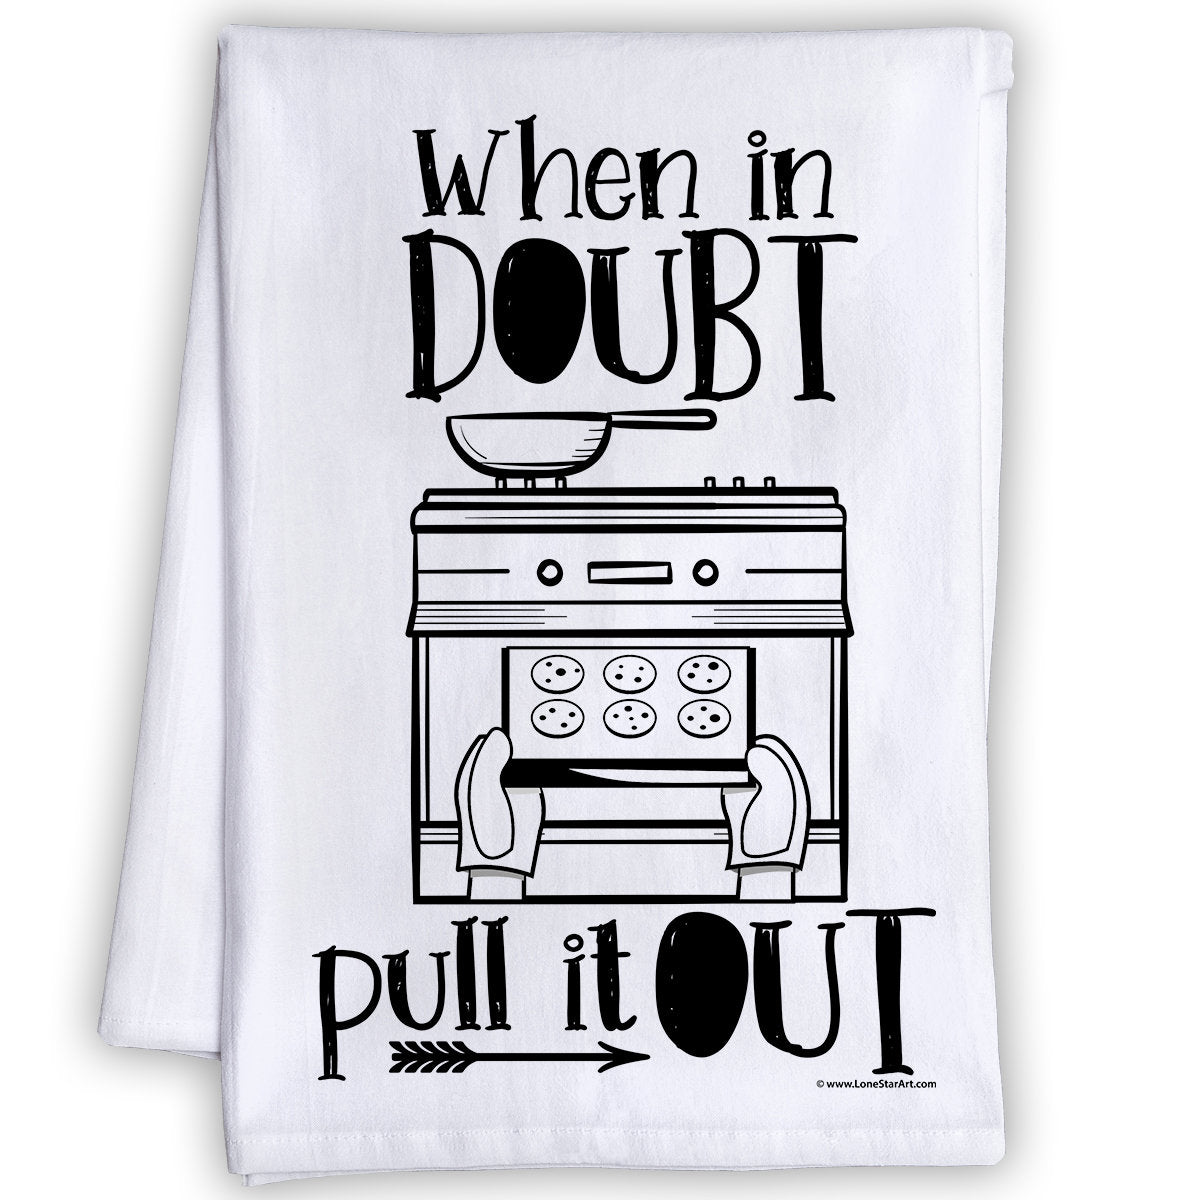 Funny Kitchen Tea Towels - When in Doubt Pull it Out - Humorous Flour Sack Dish Towel - Great Gift for Bakers and Hilarious Kitchen Decor Lone Star Art 